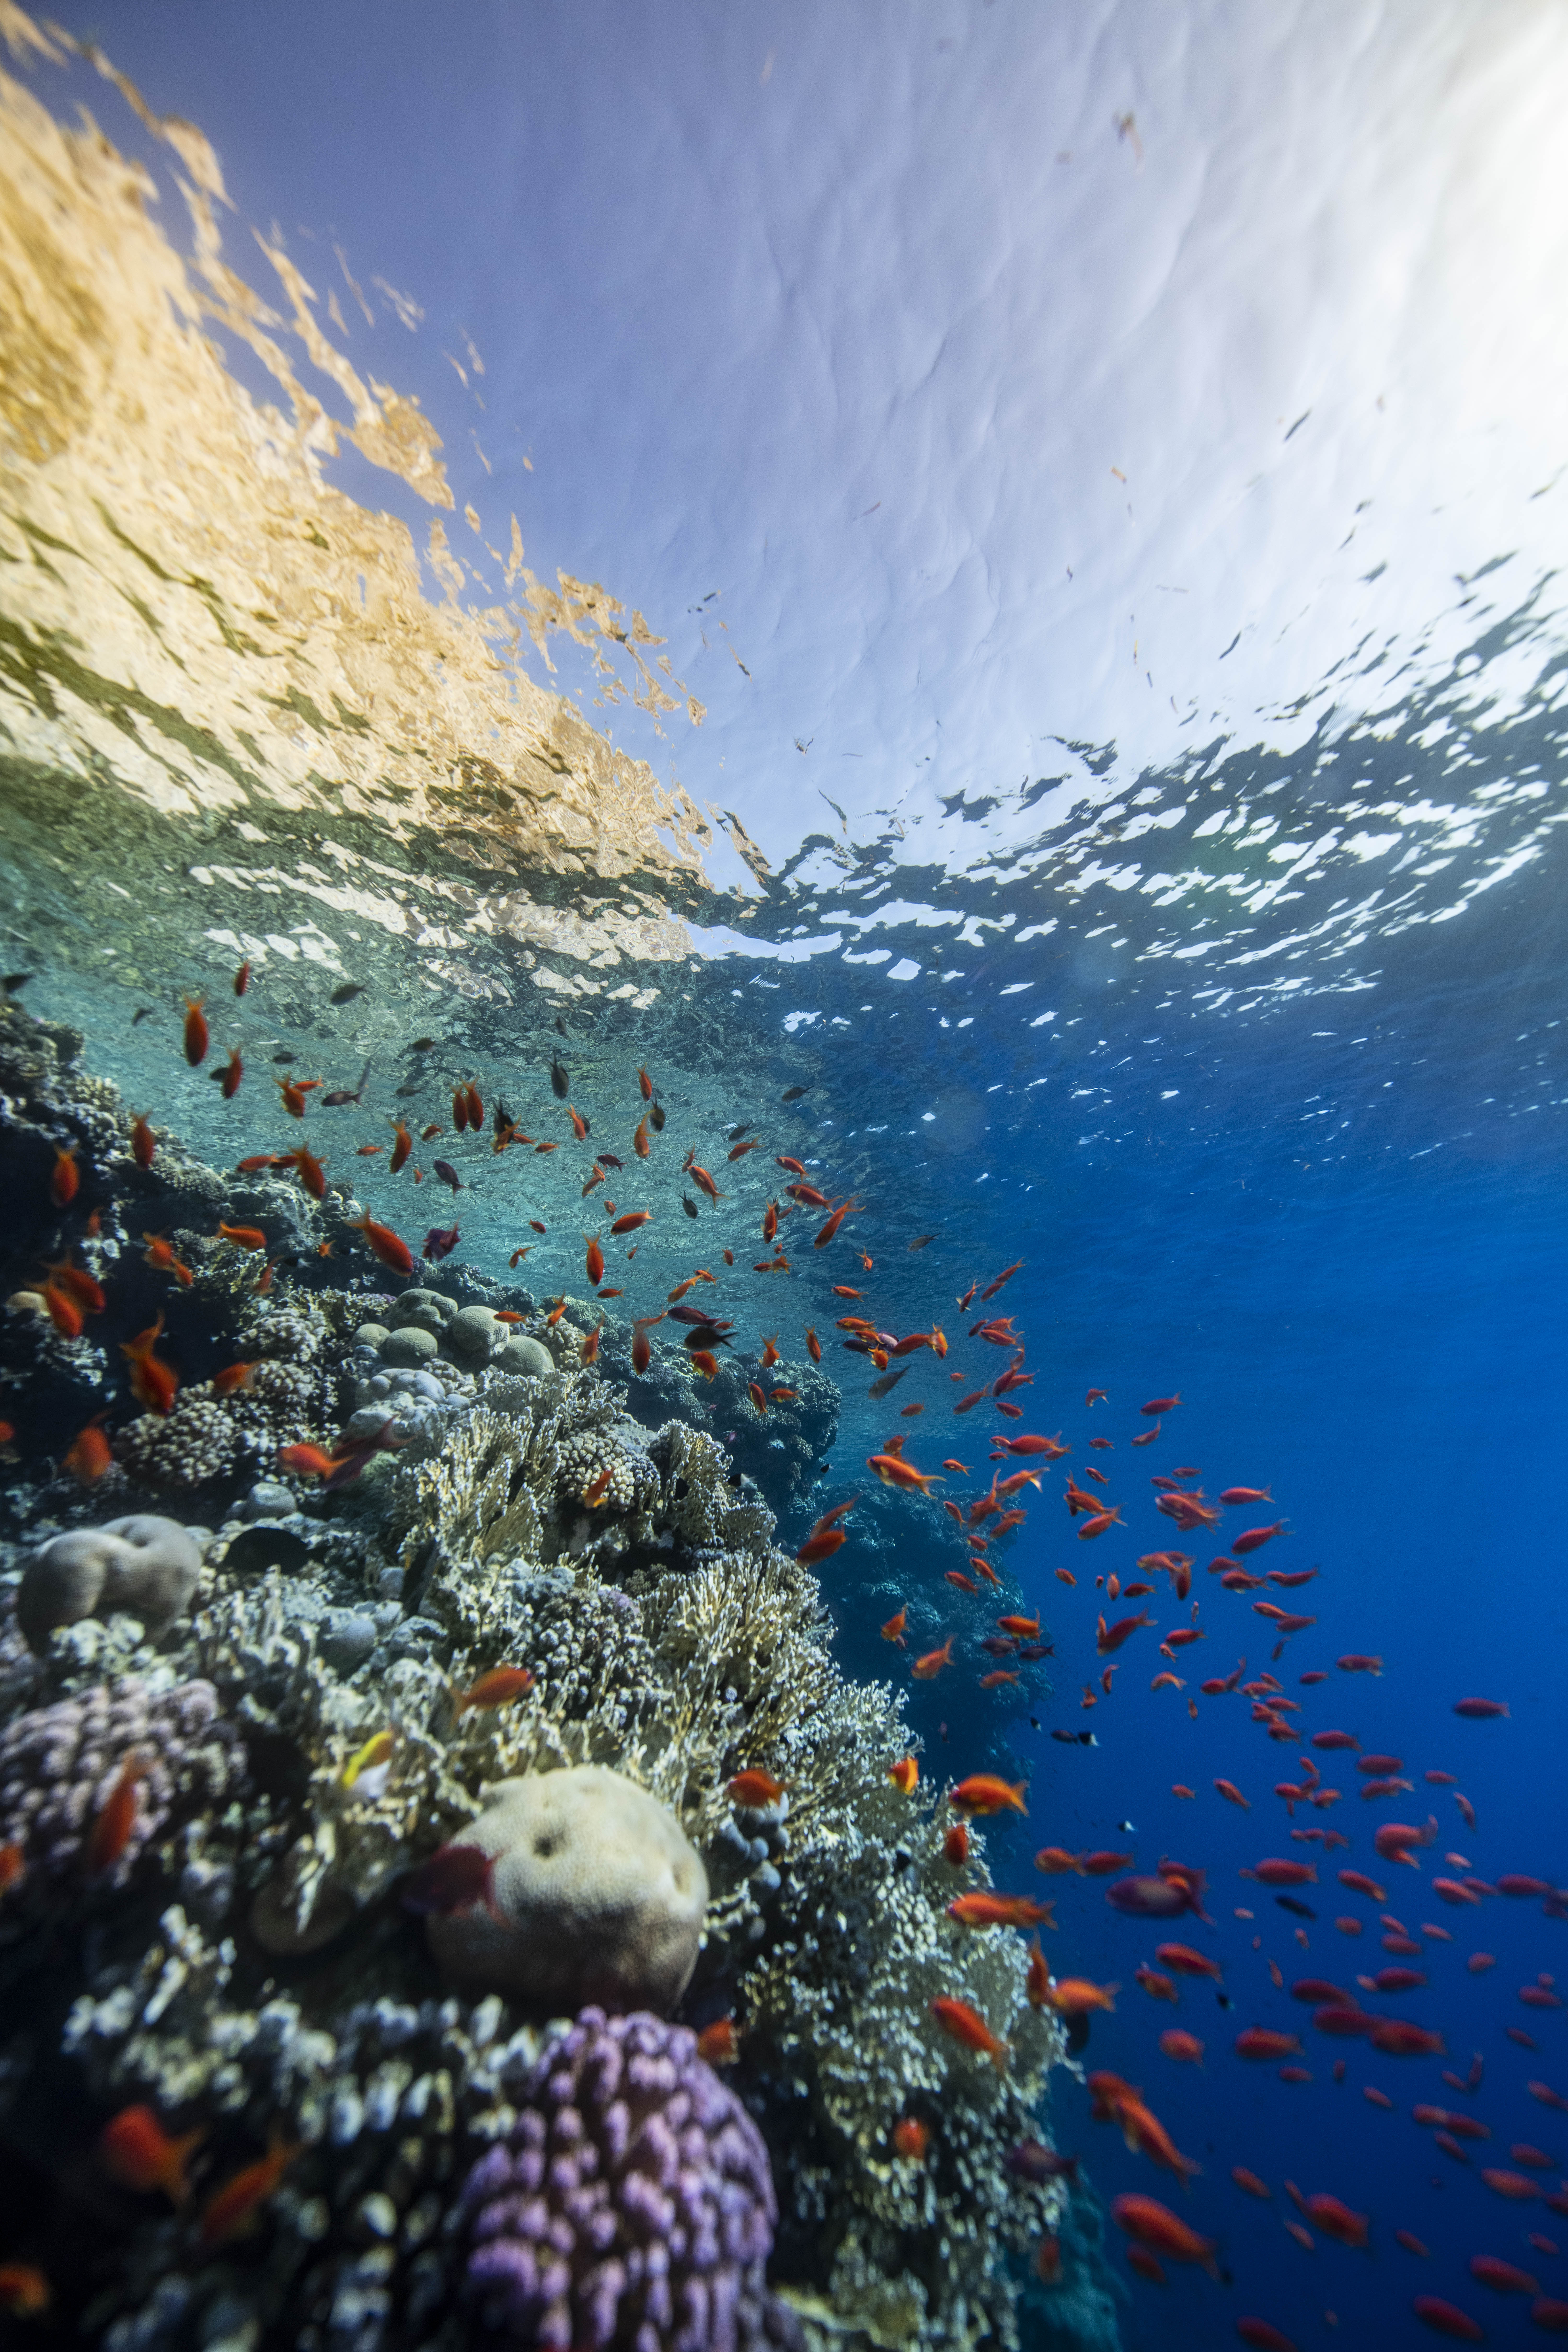 An underwater view of coral reefs teeming with fish